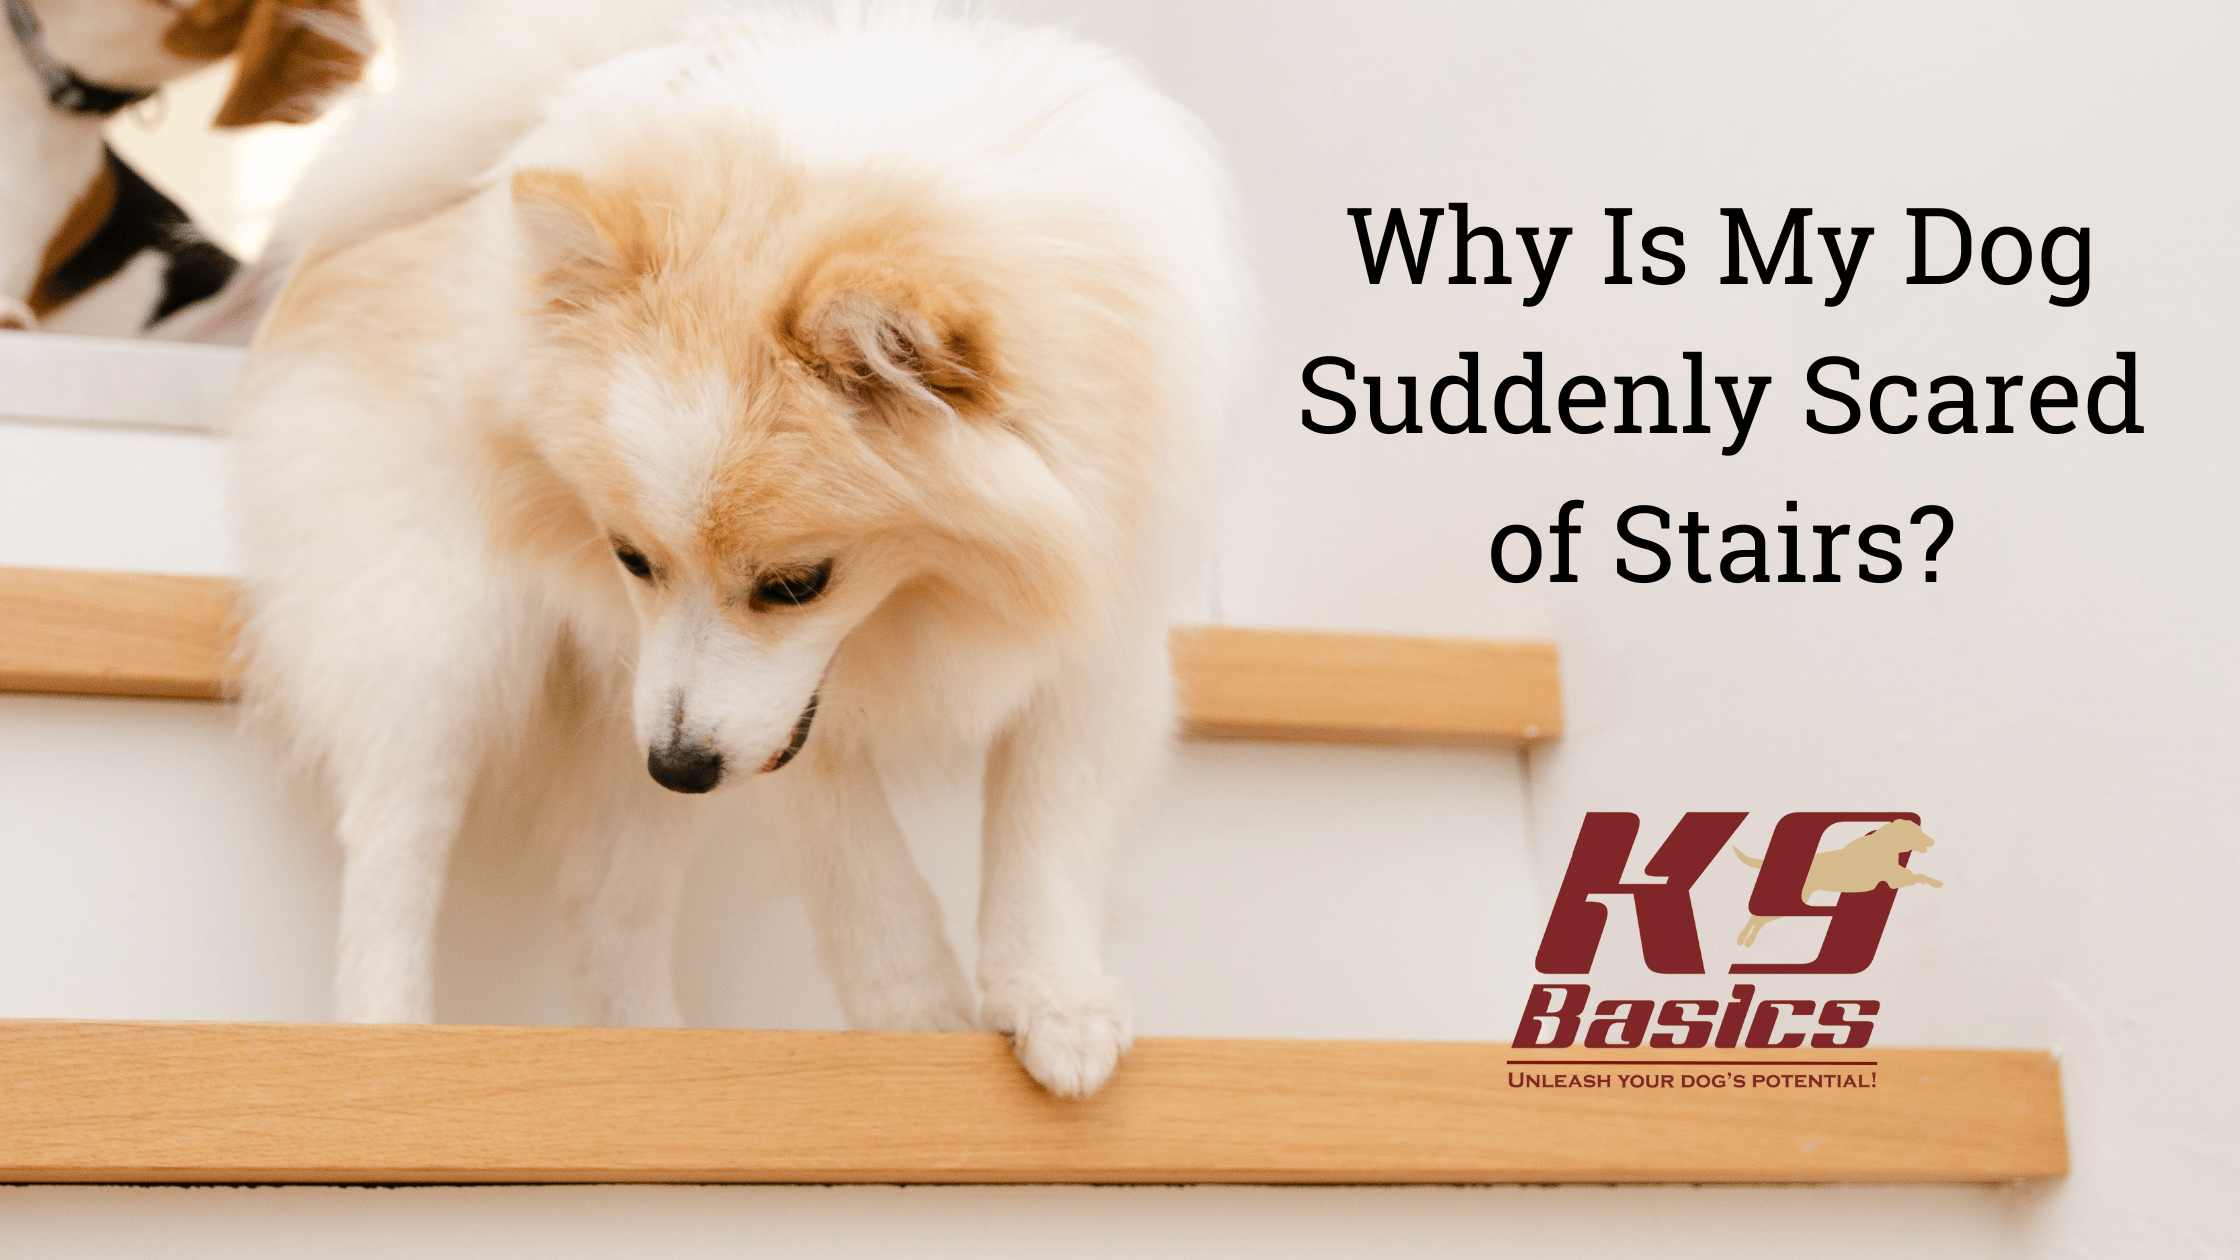 Why is My Dog Suddenly Scared of Stairs?